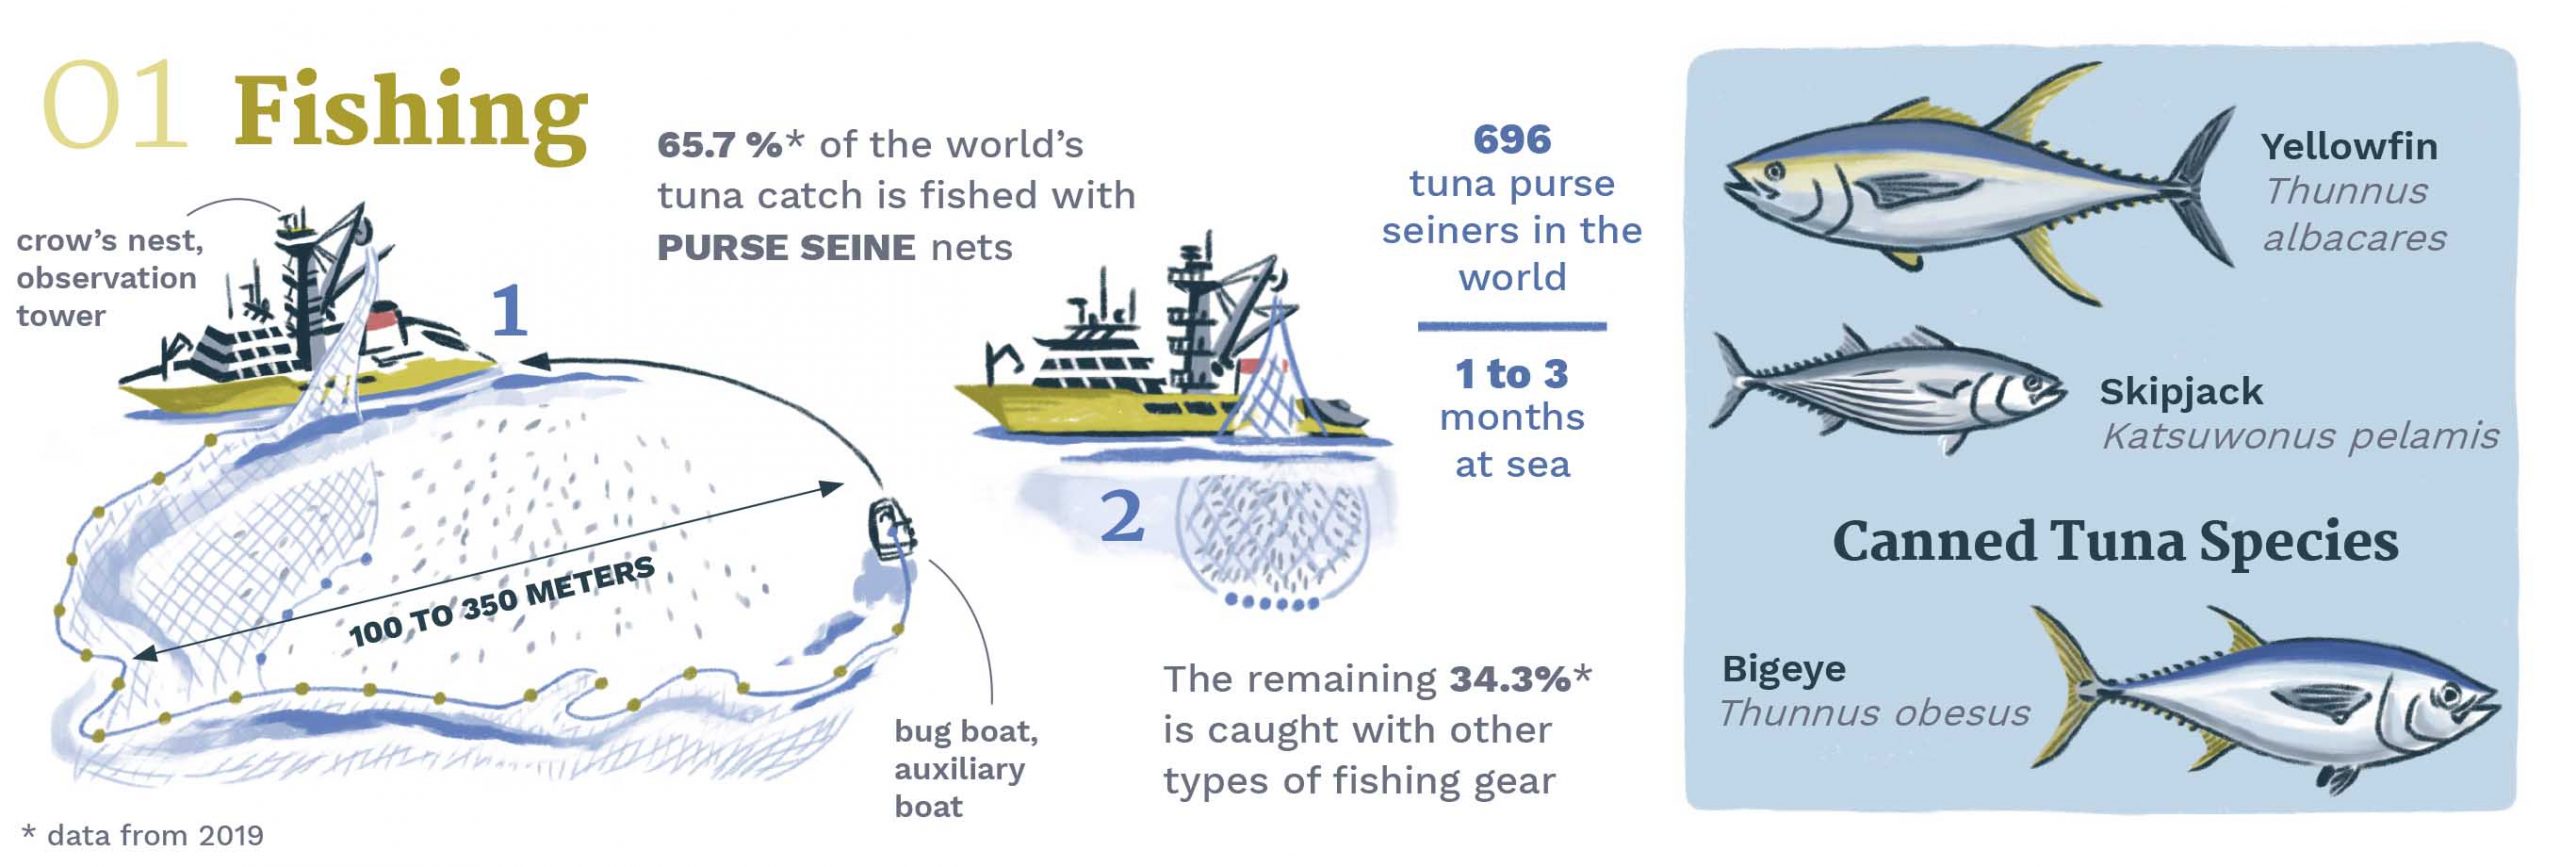 CANNED TUNA (II). THE JOURNEY OF A CAN - Planet tuna